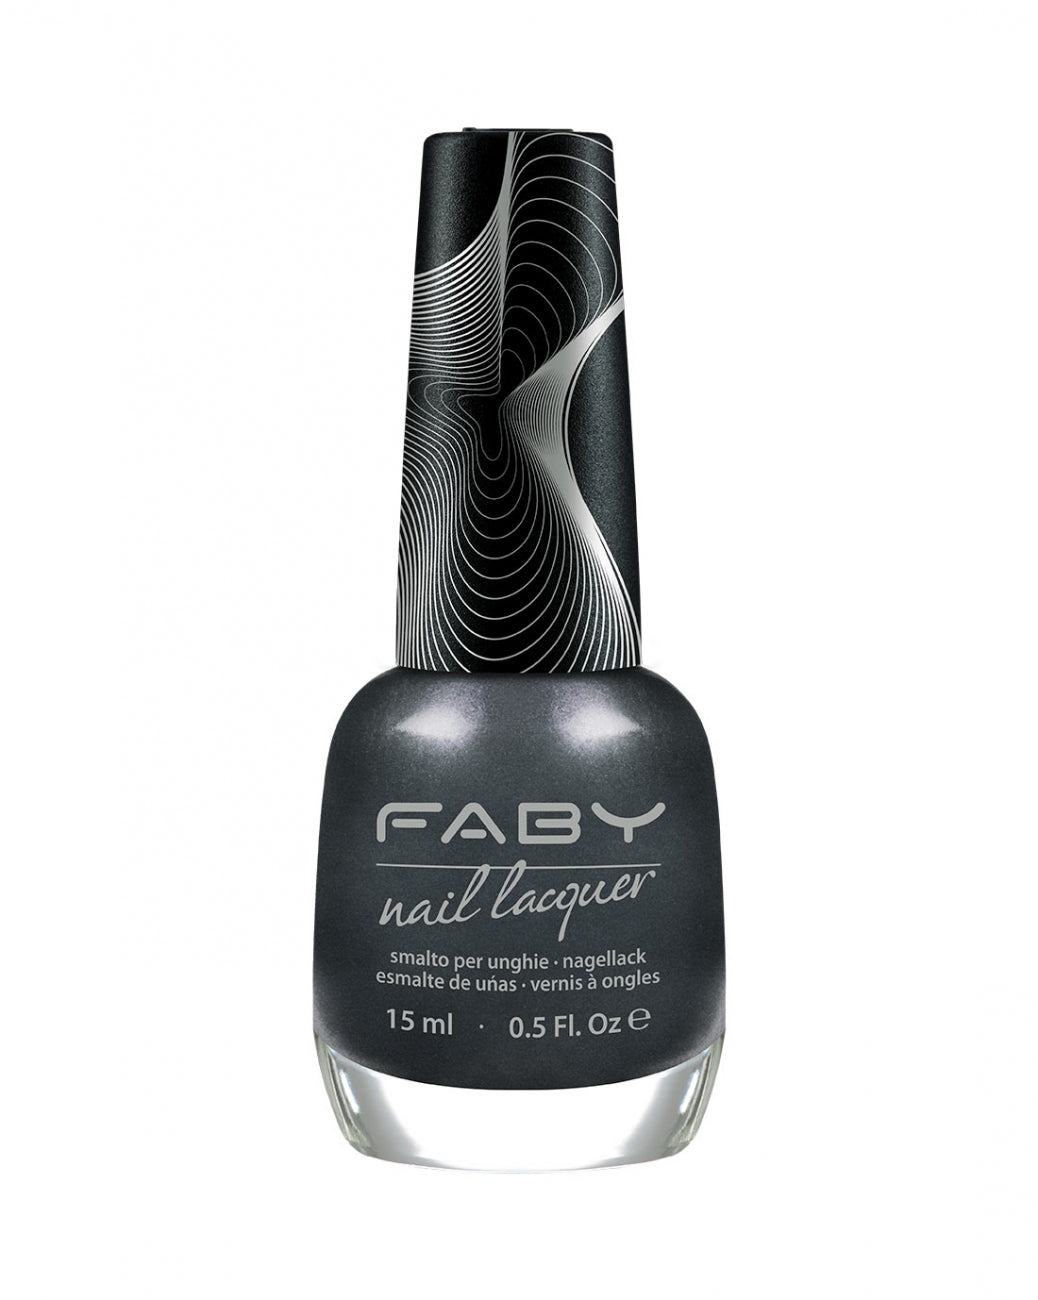 Faby Museum Mile 15ml